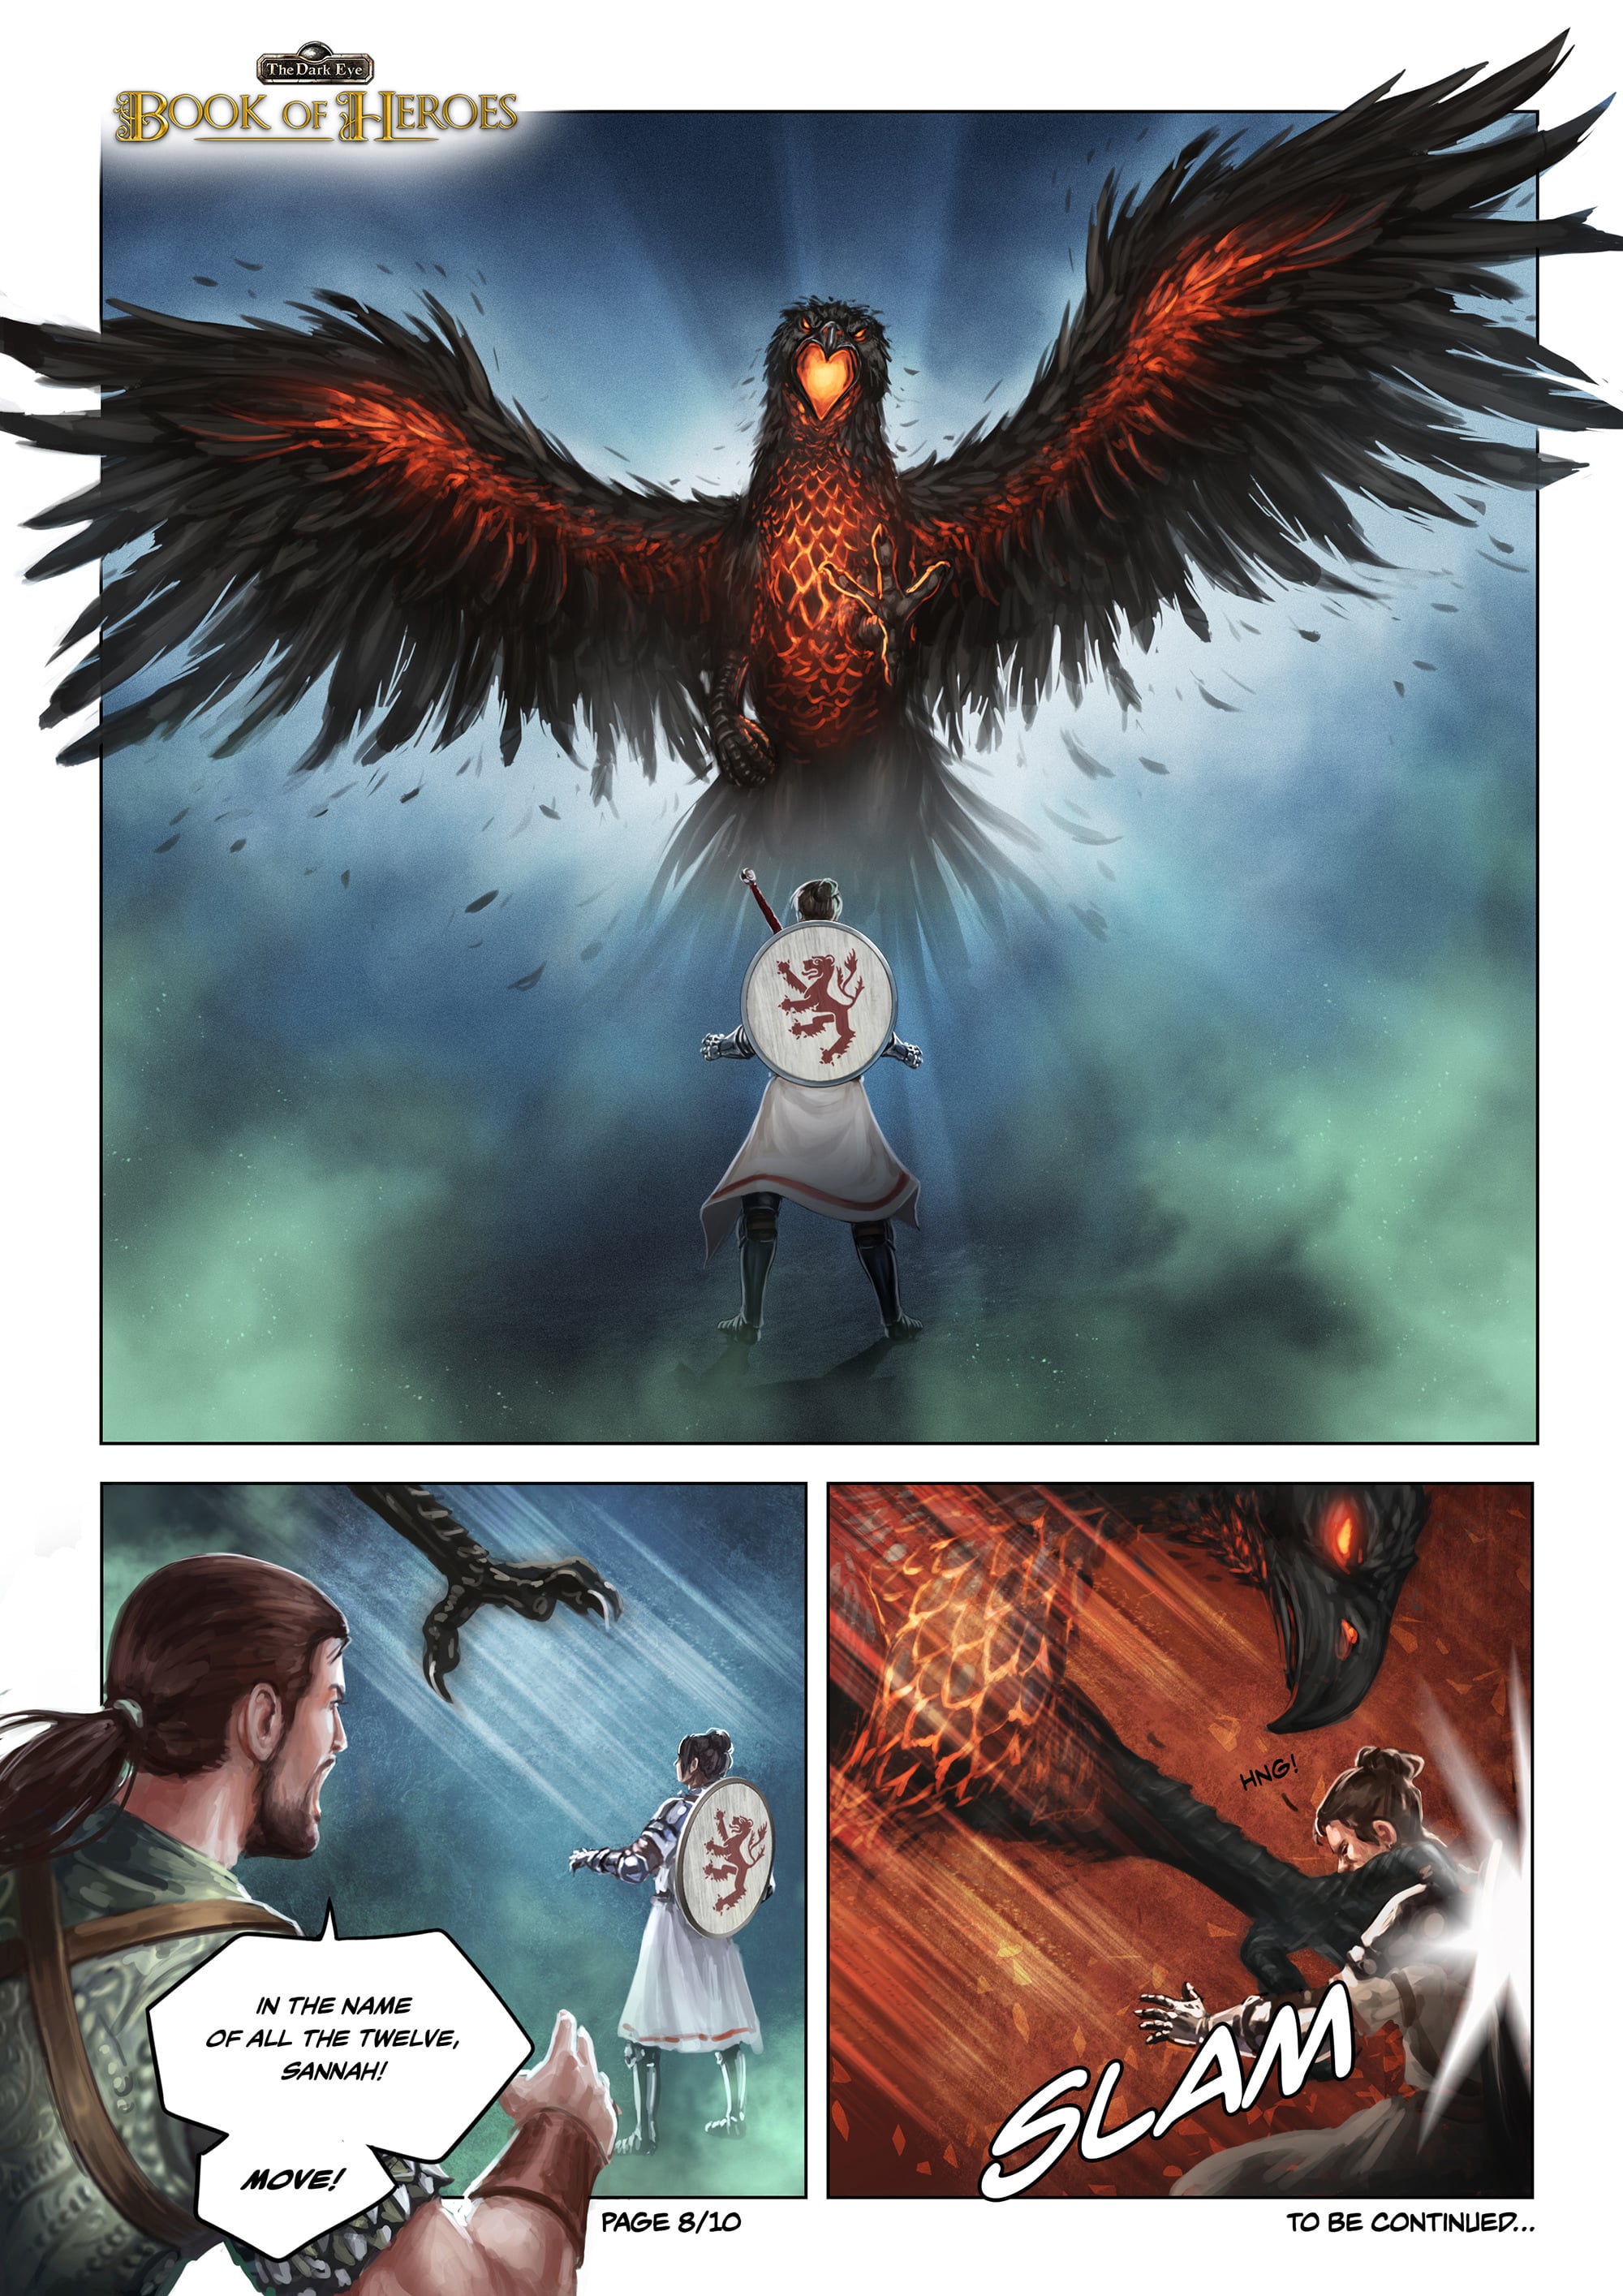 Book of Heroes Chapter 1 Page 8